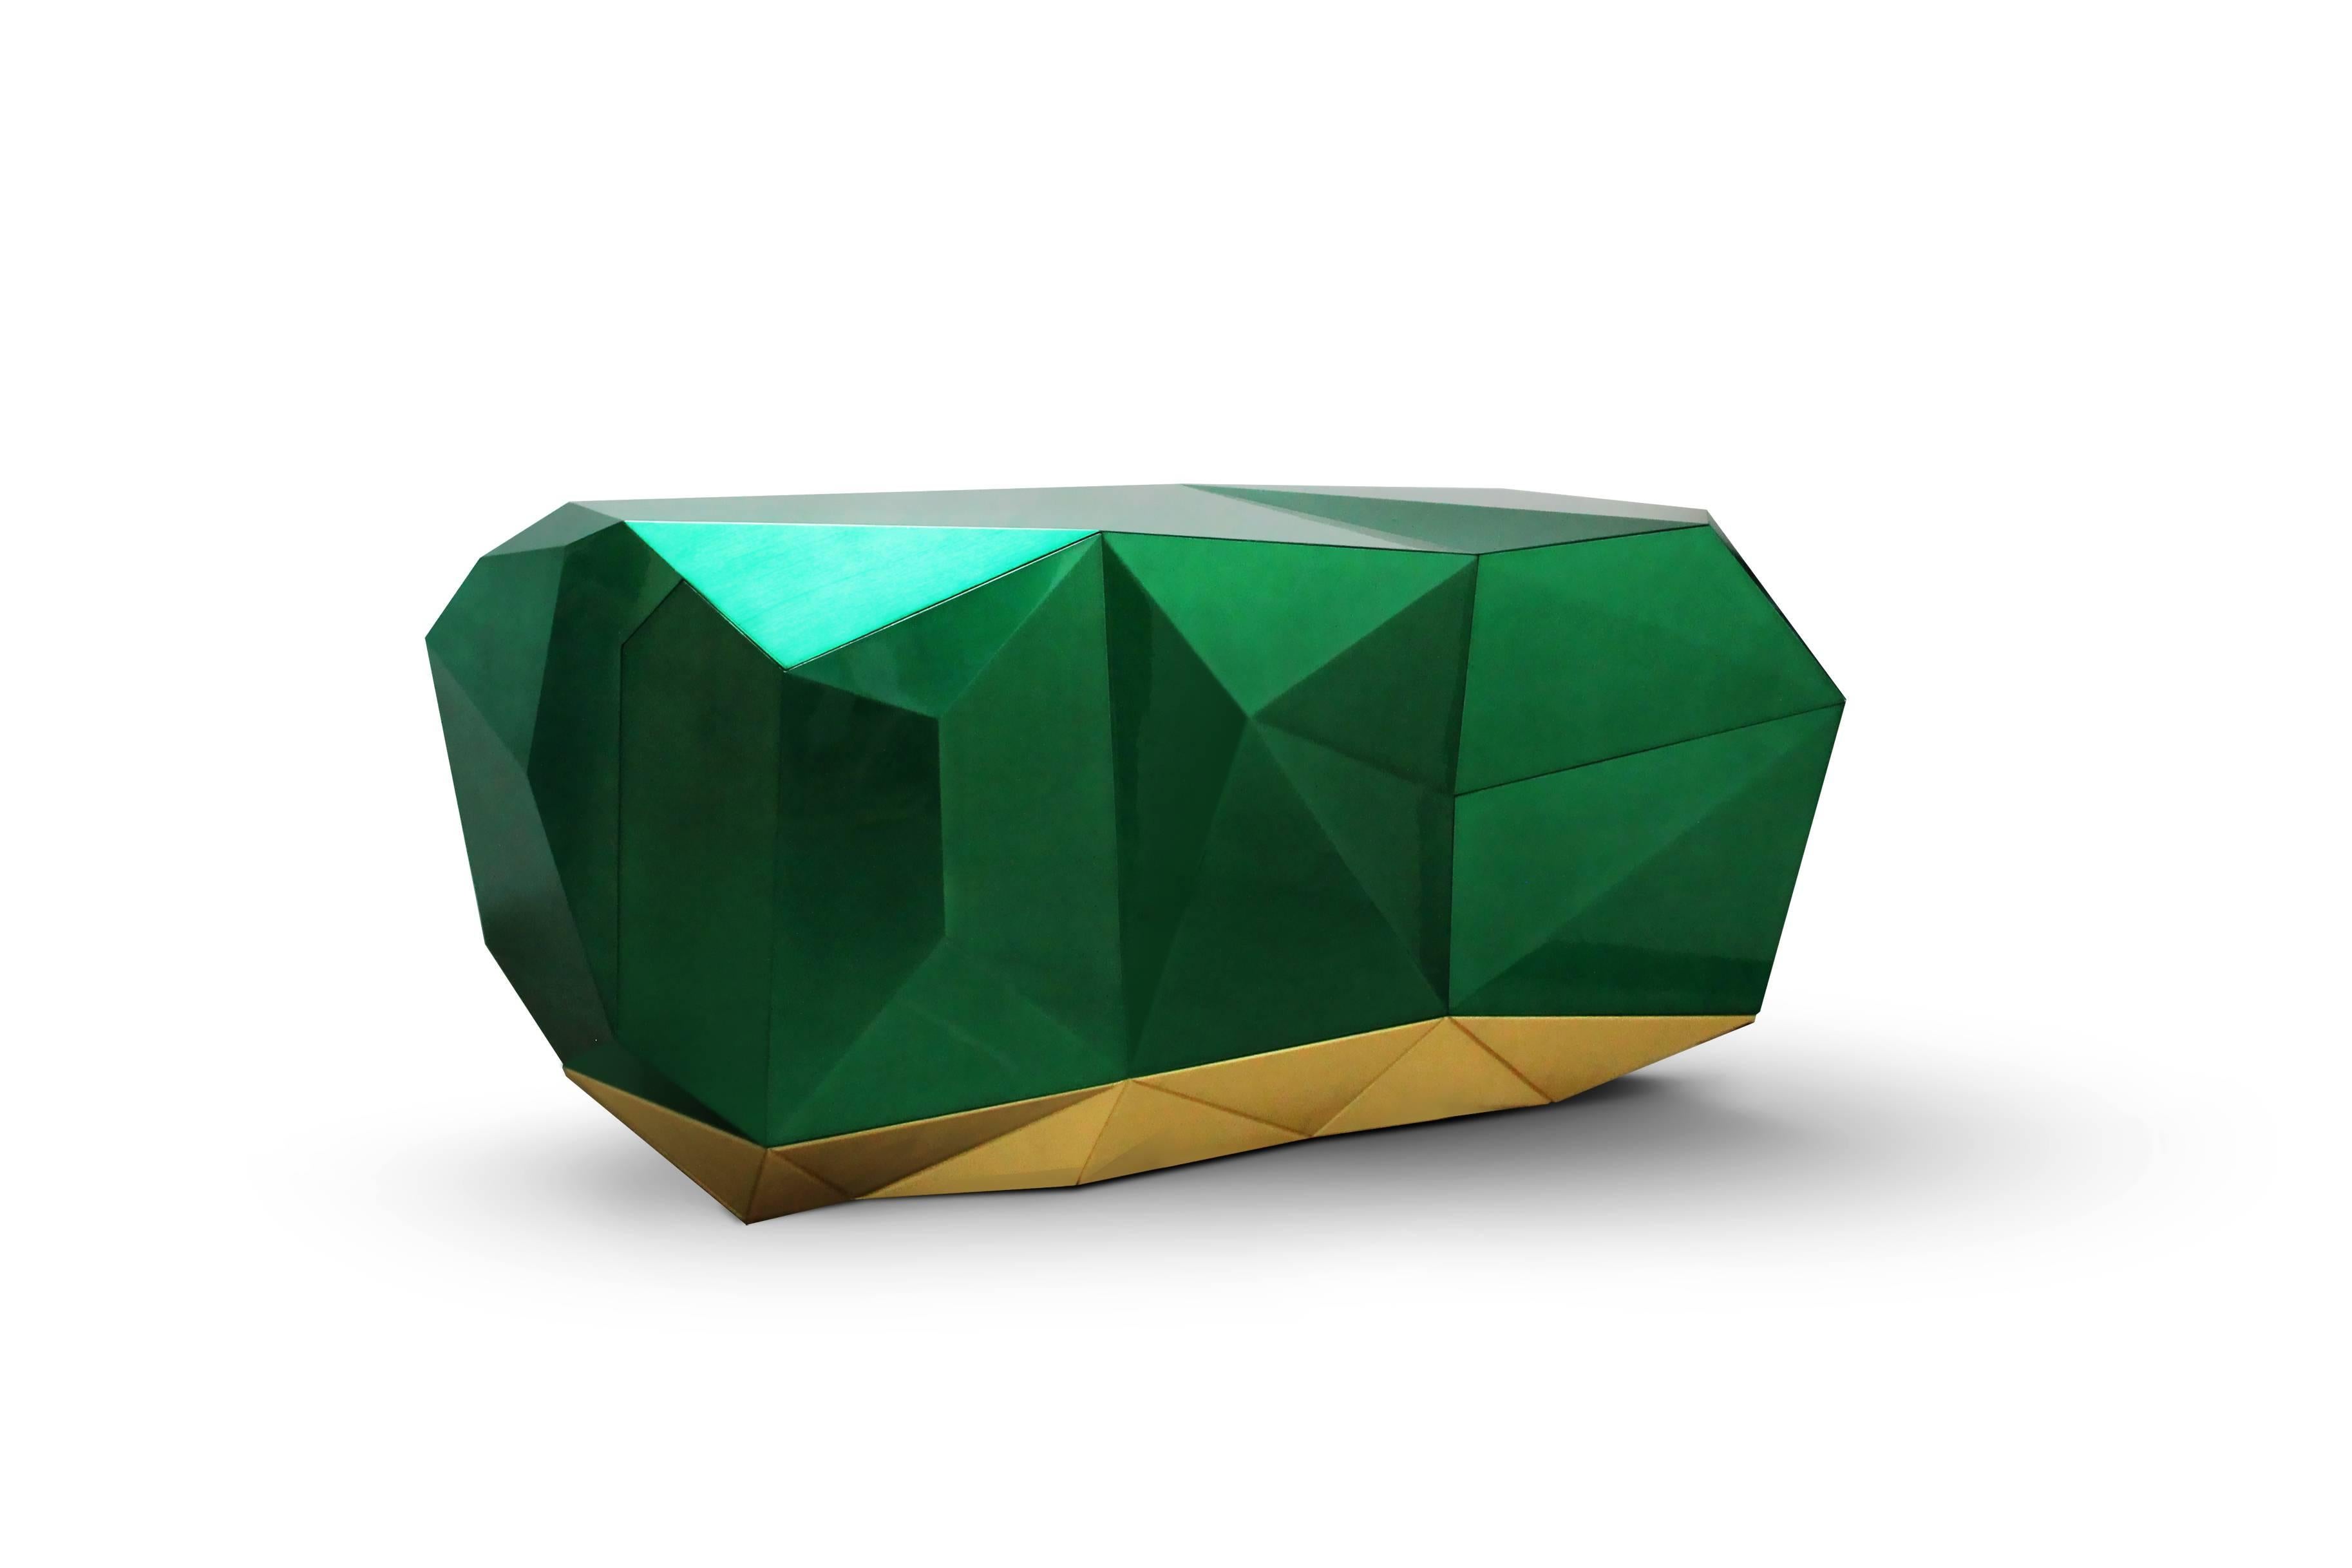 With the style of a precious jewel, the new diamond sideboard is made from wood finished with a luxurious shade of translucent green emerald with high gloss varnish. The faceted sideboard is totally manually produced. It features three highly